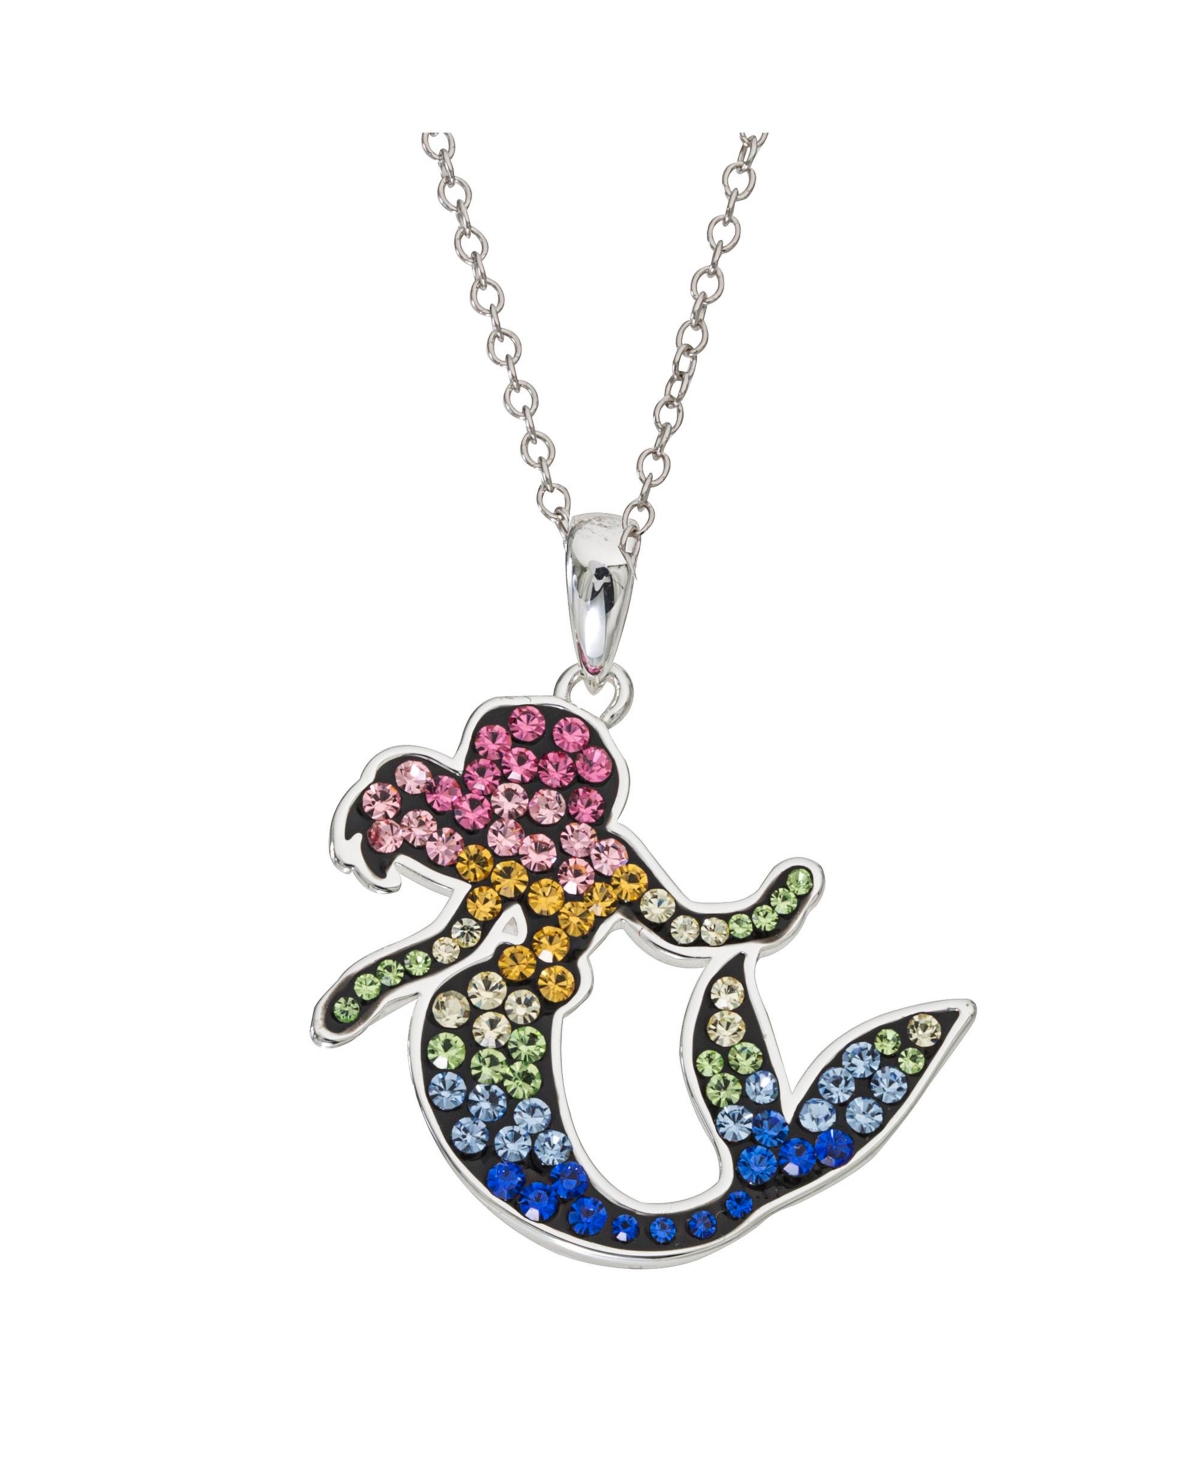 The Little Mermaid Ariel Rainbow Crystal Silver Flash Plated Pendant Necklace, 18" - Silver tone, pink, yellow, blue